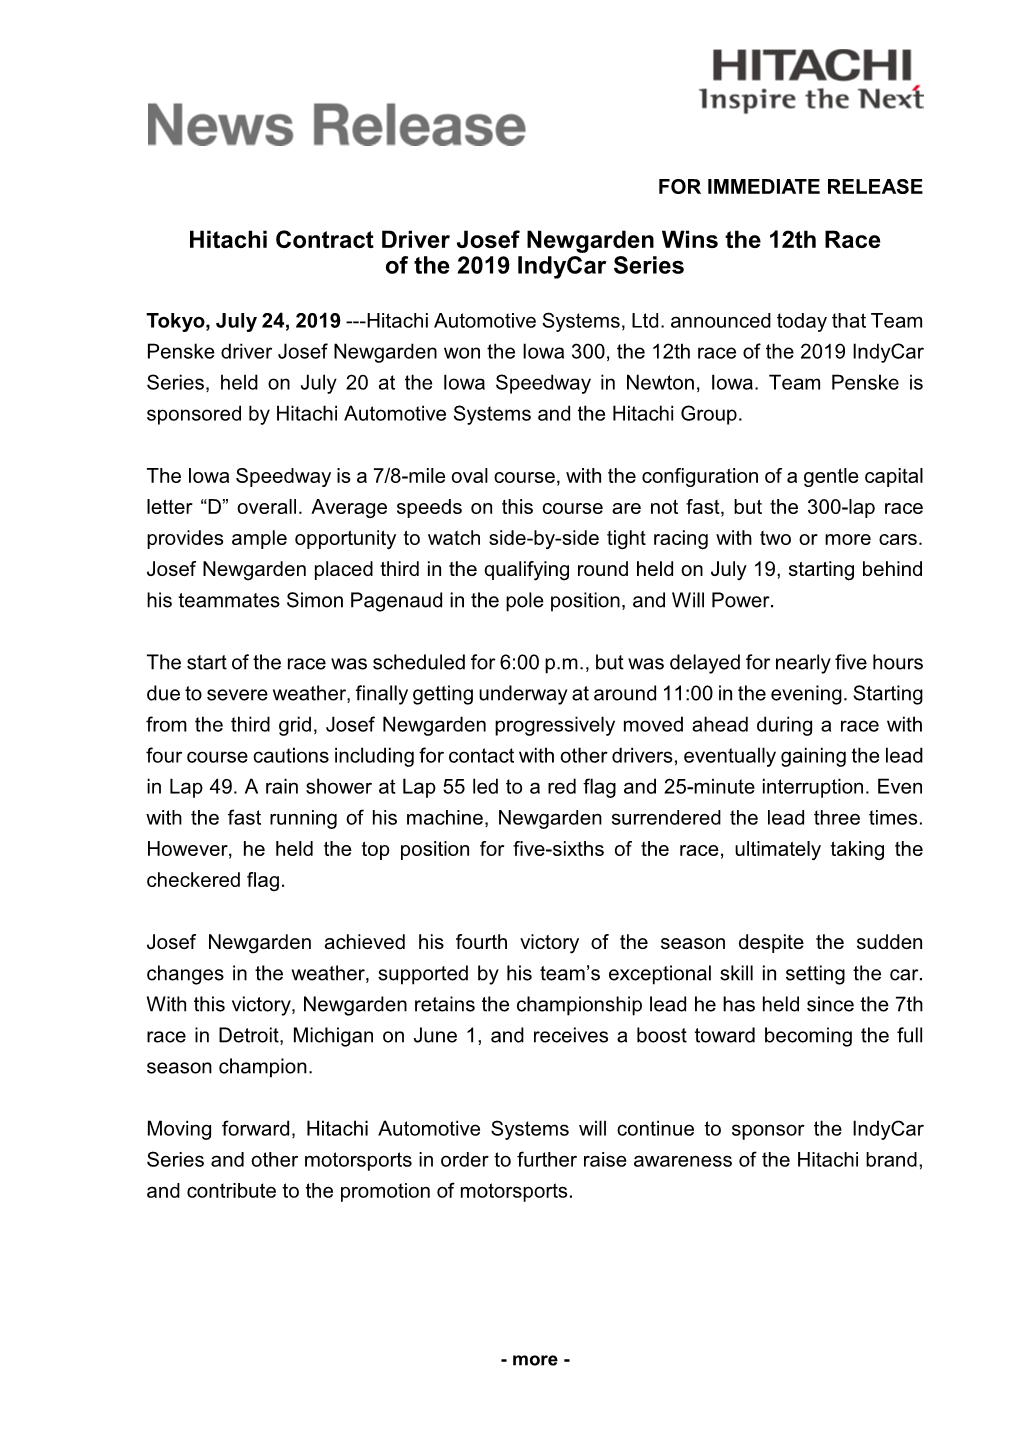 Hitachi Contract Driver Josef Newgarden Wins the 12Th Race of the 2019 Indycar Series